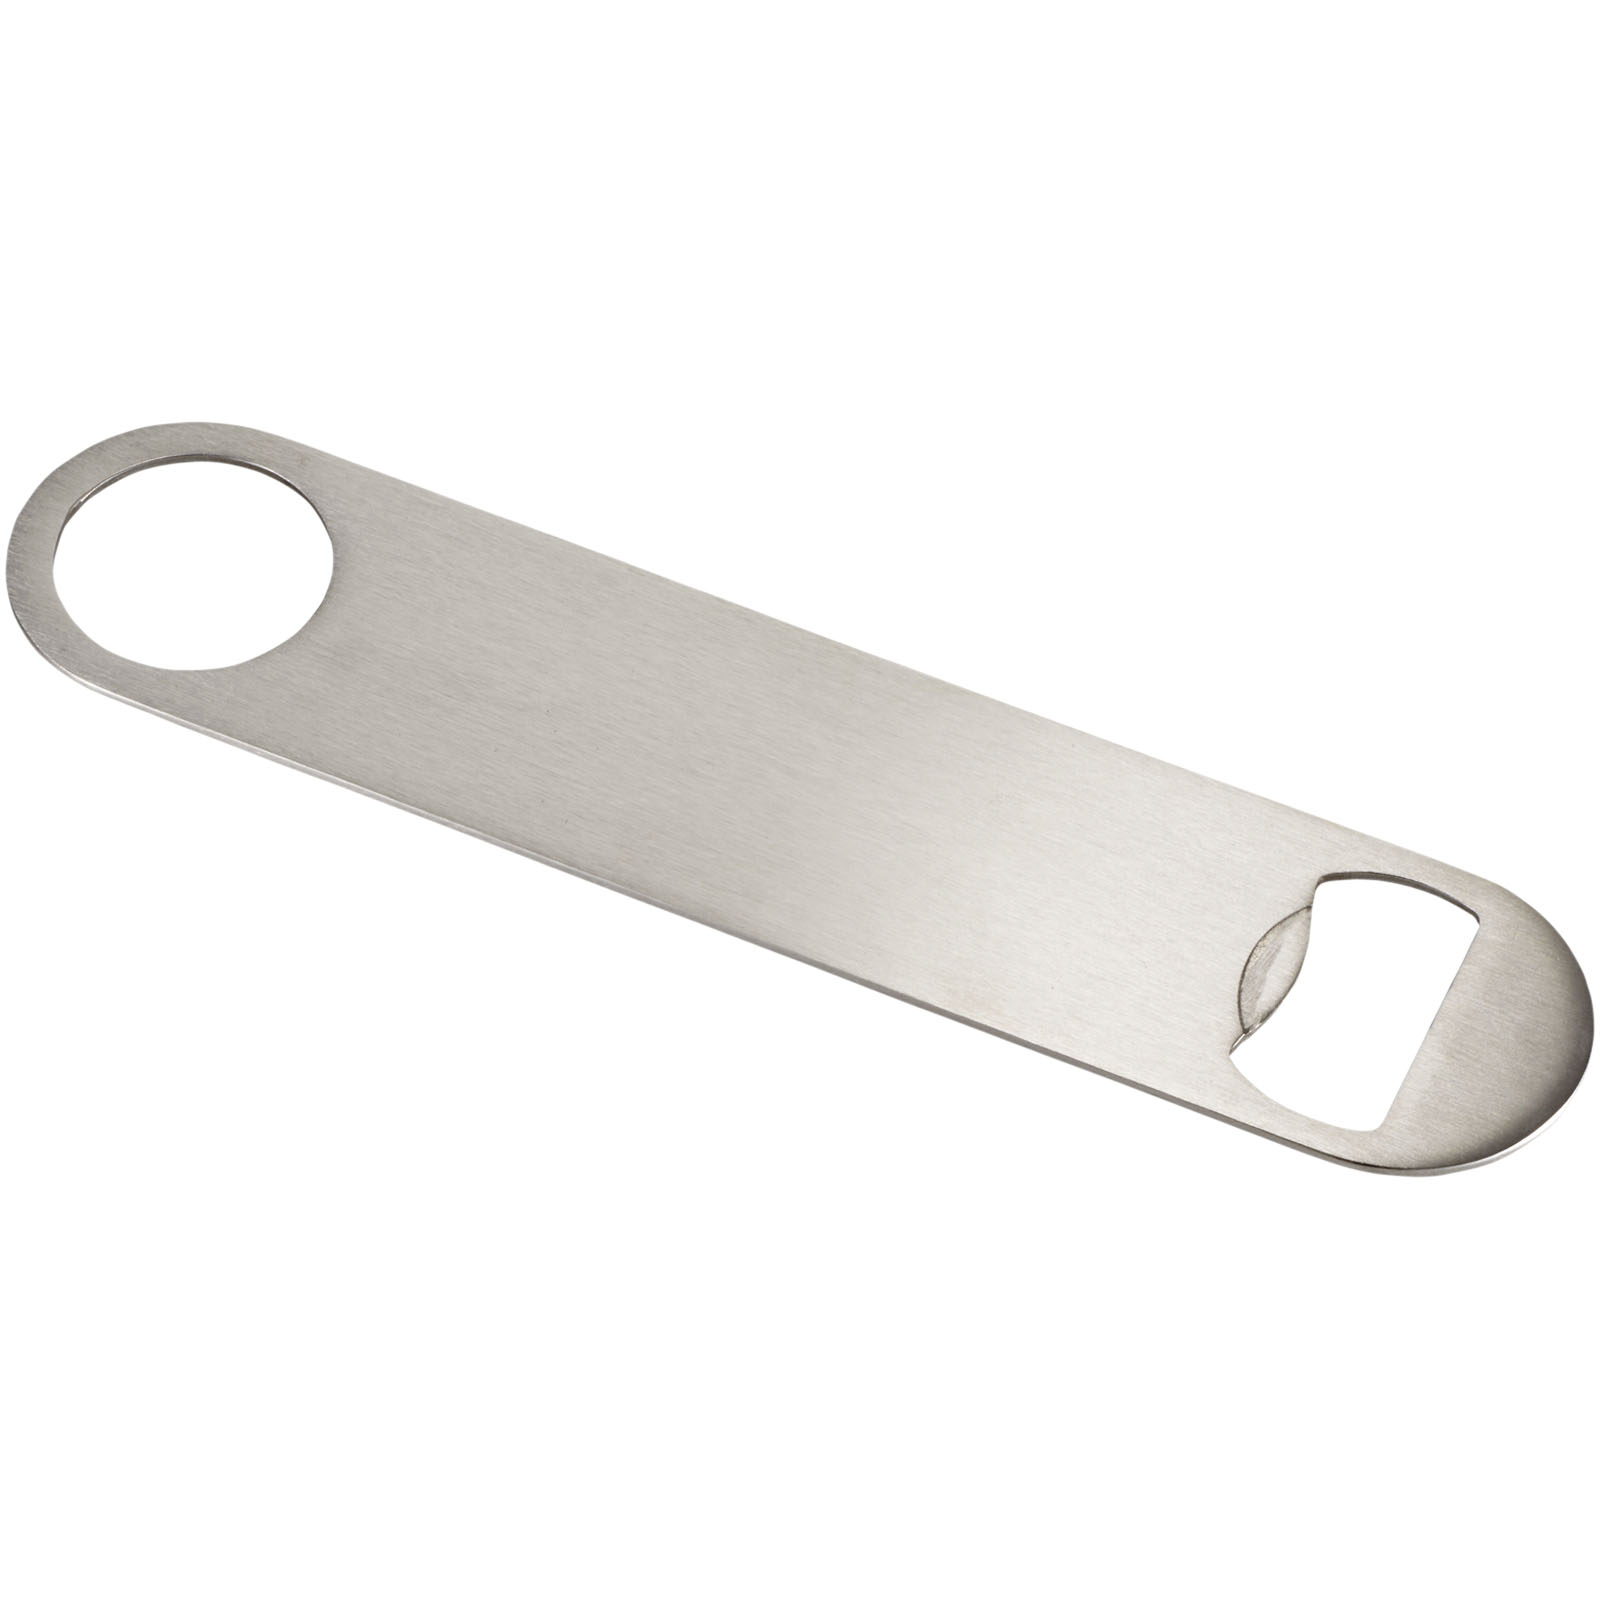 Advertising Bottle Openers & Accessories - Paddle bottle opener - 0